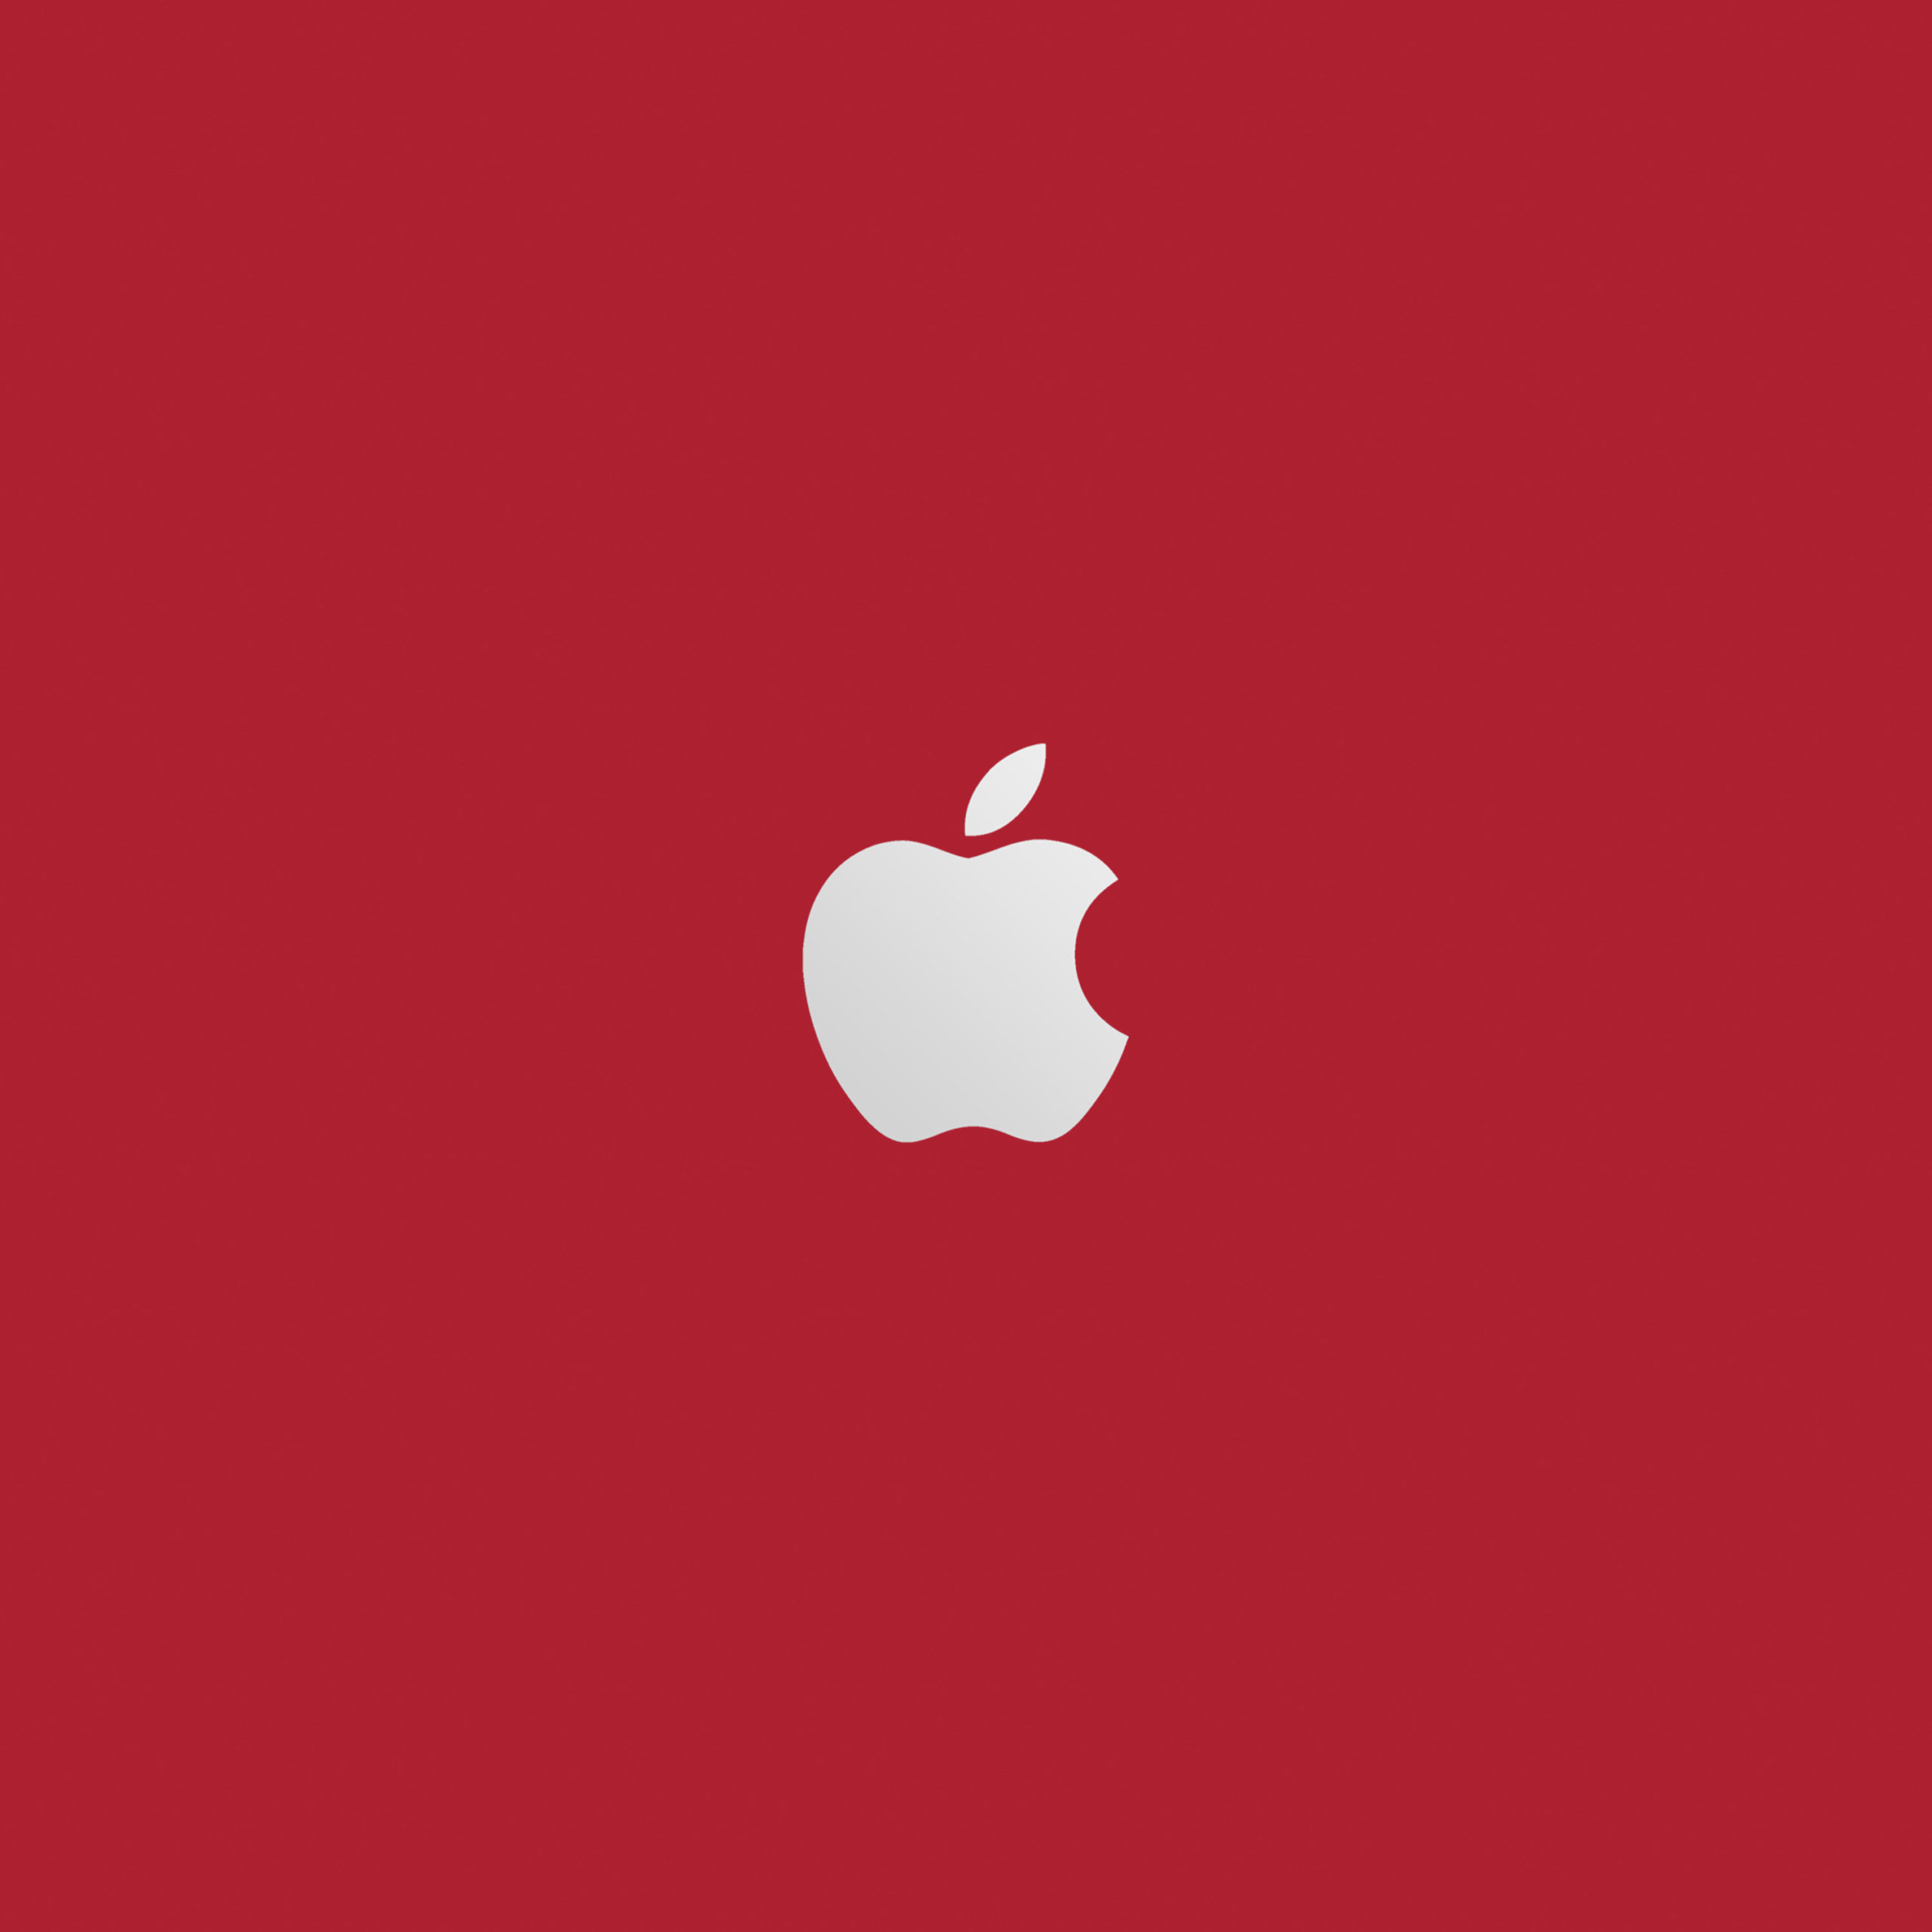 Ipad Iphone 7 Product Red Special Edition Free Apple Papers